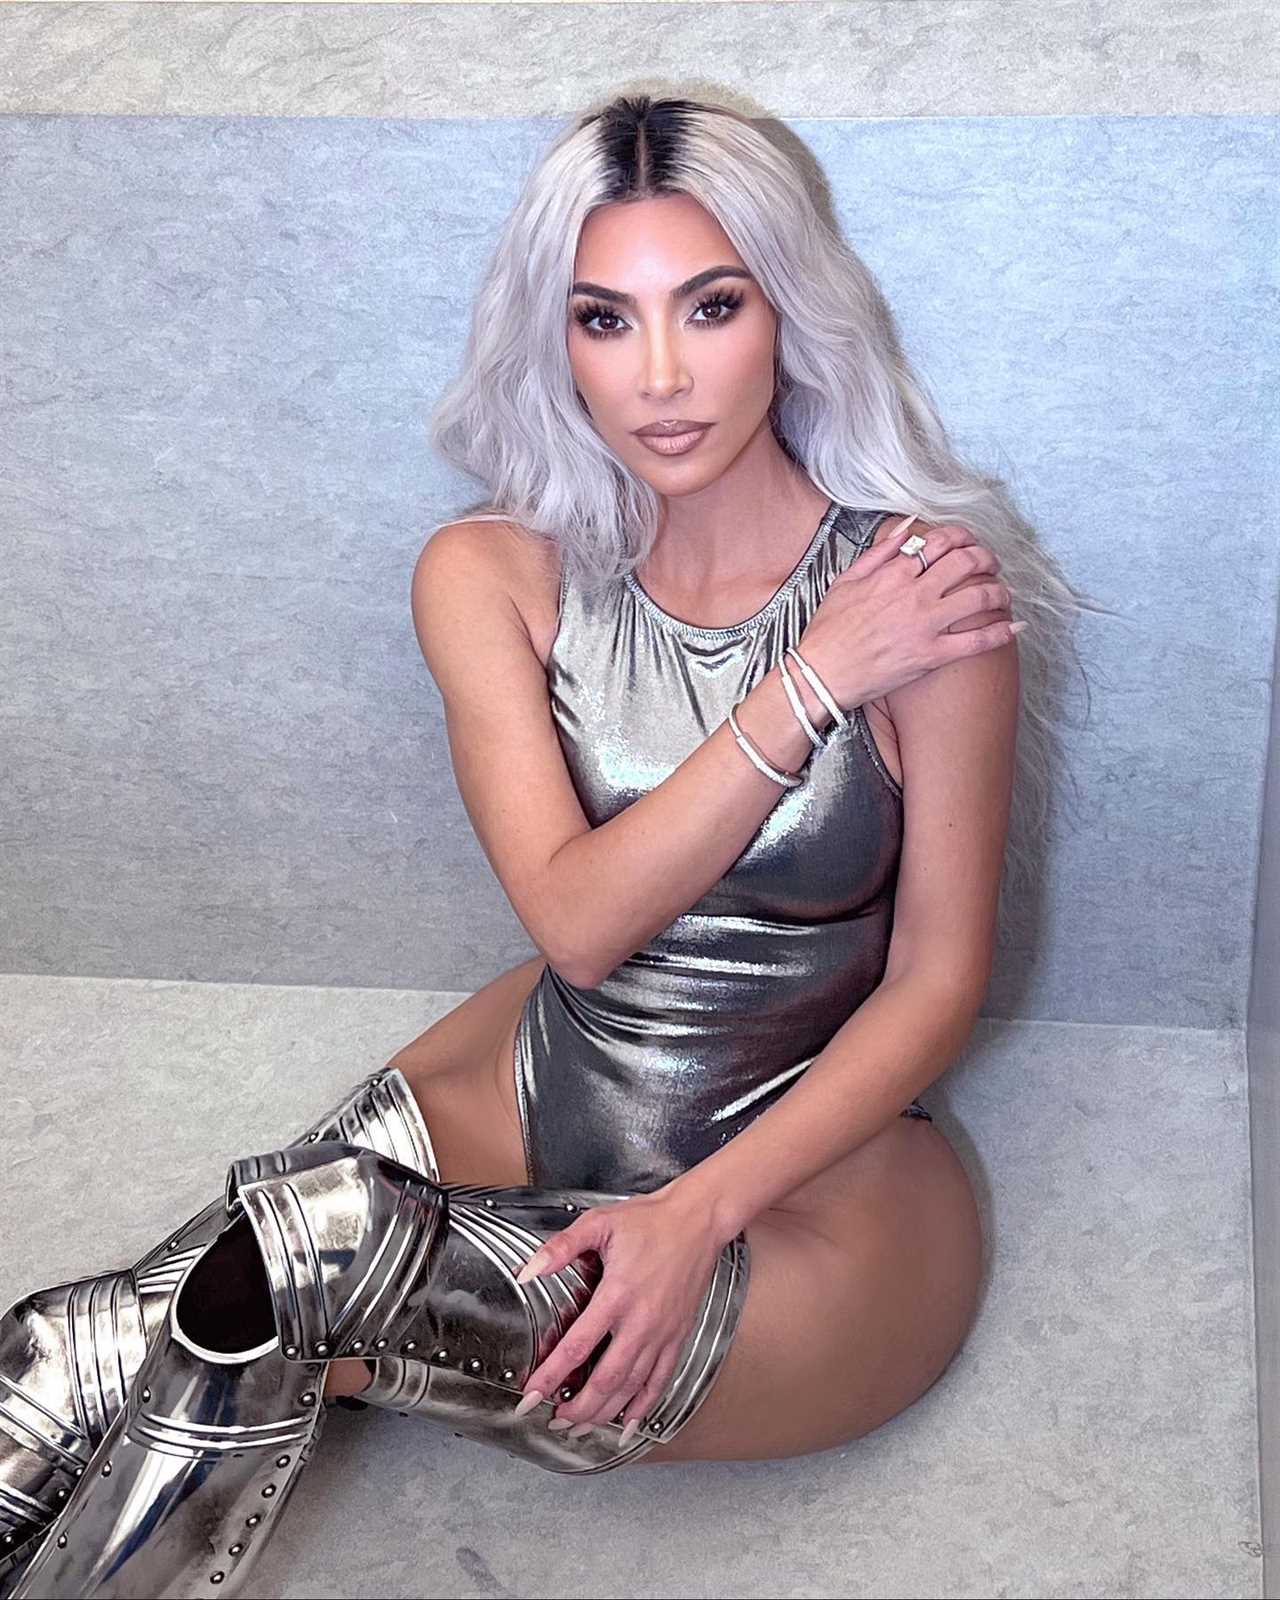 Kim Kardashian poses in just a silver bodysuit & thigh-high boots in sexy new photos after her dramatic weight loss